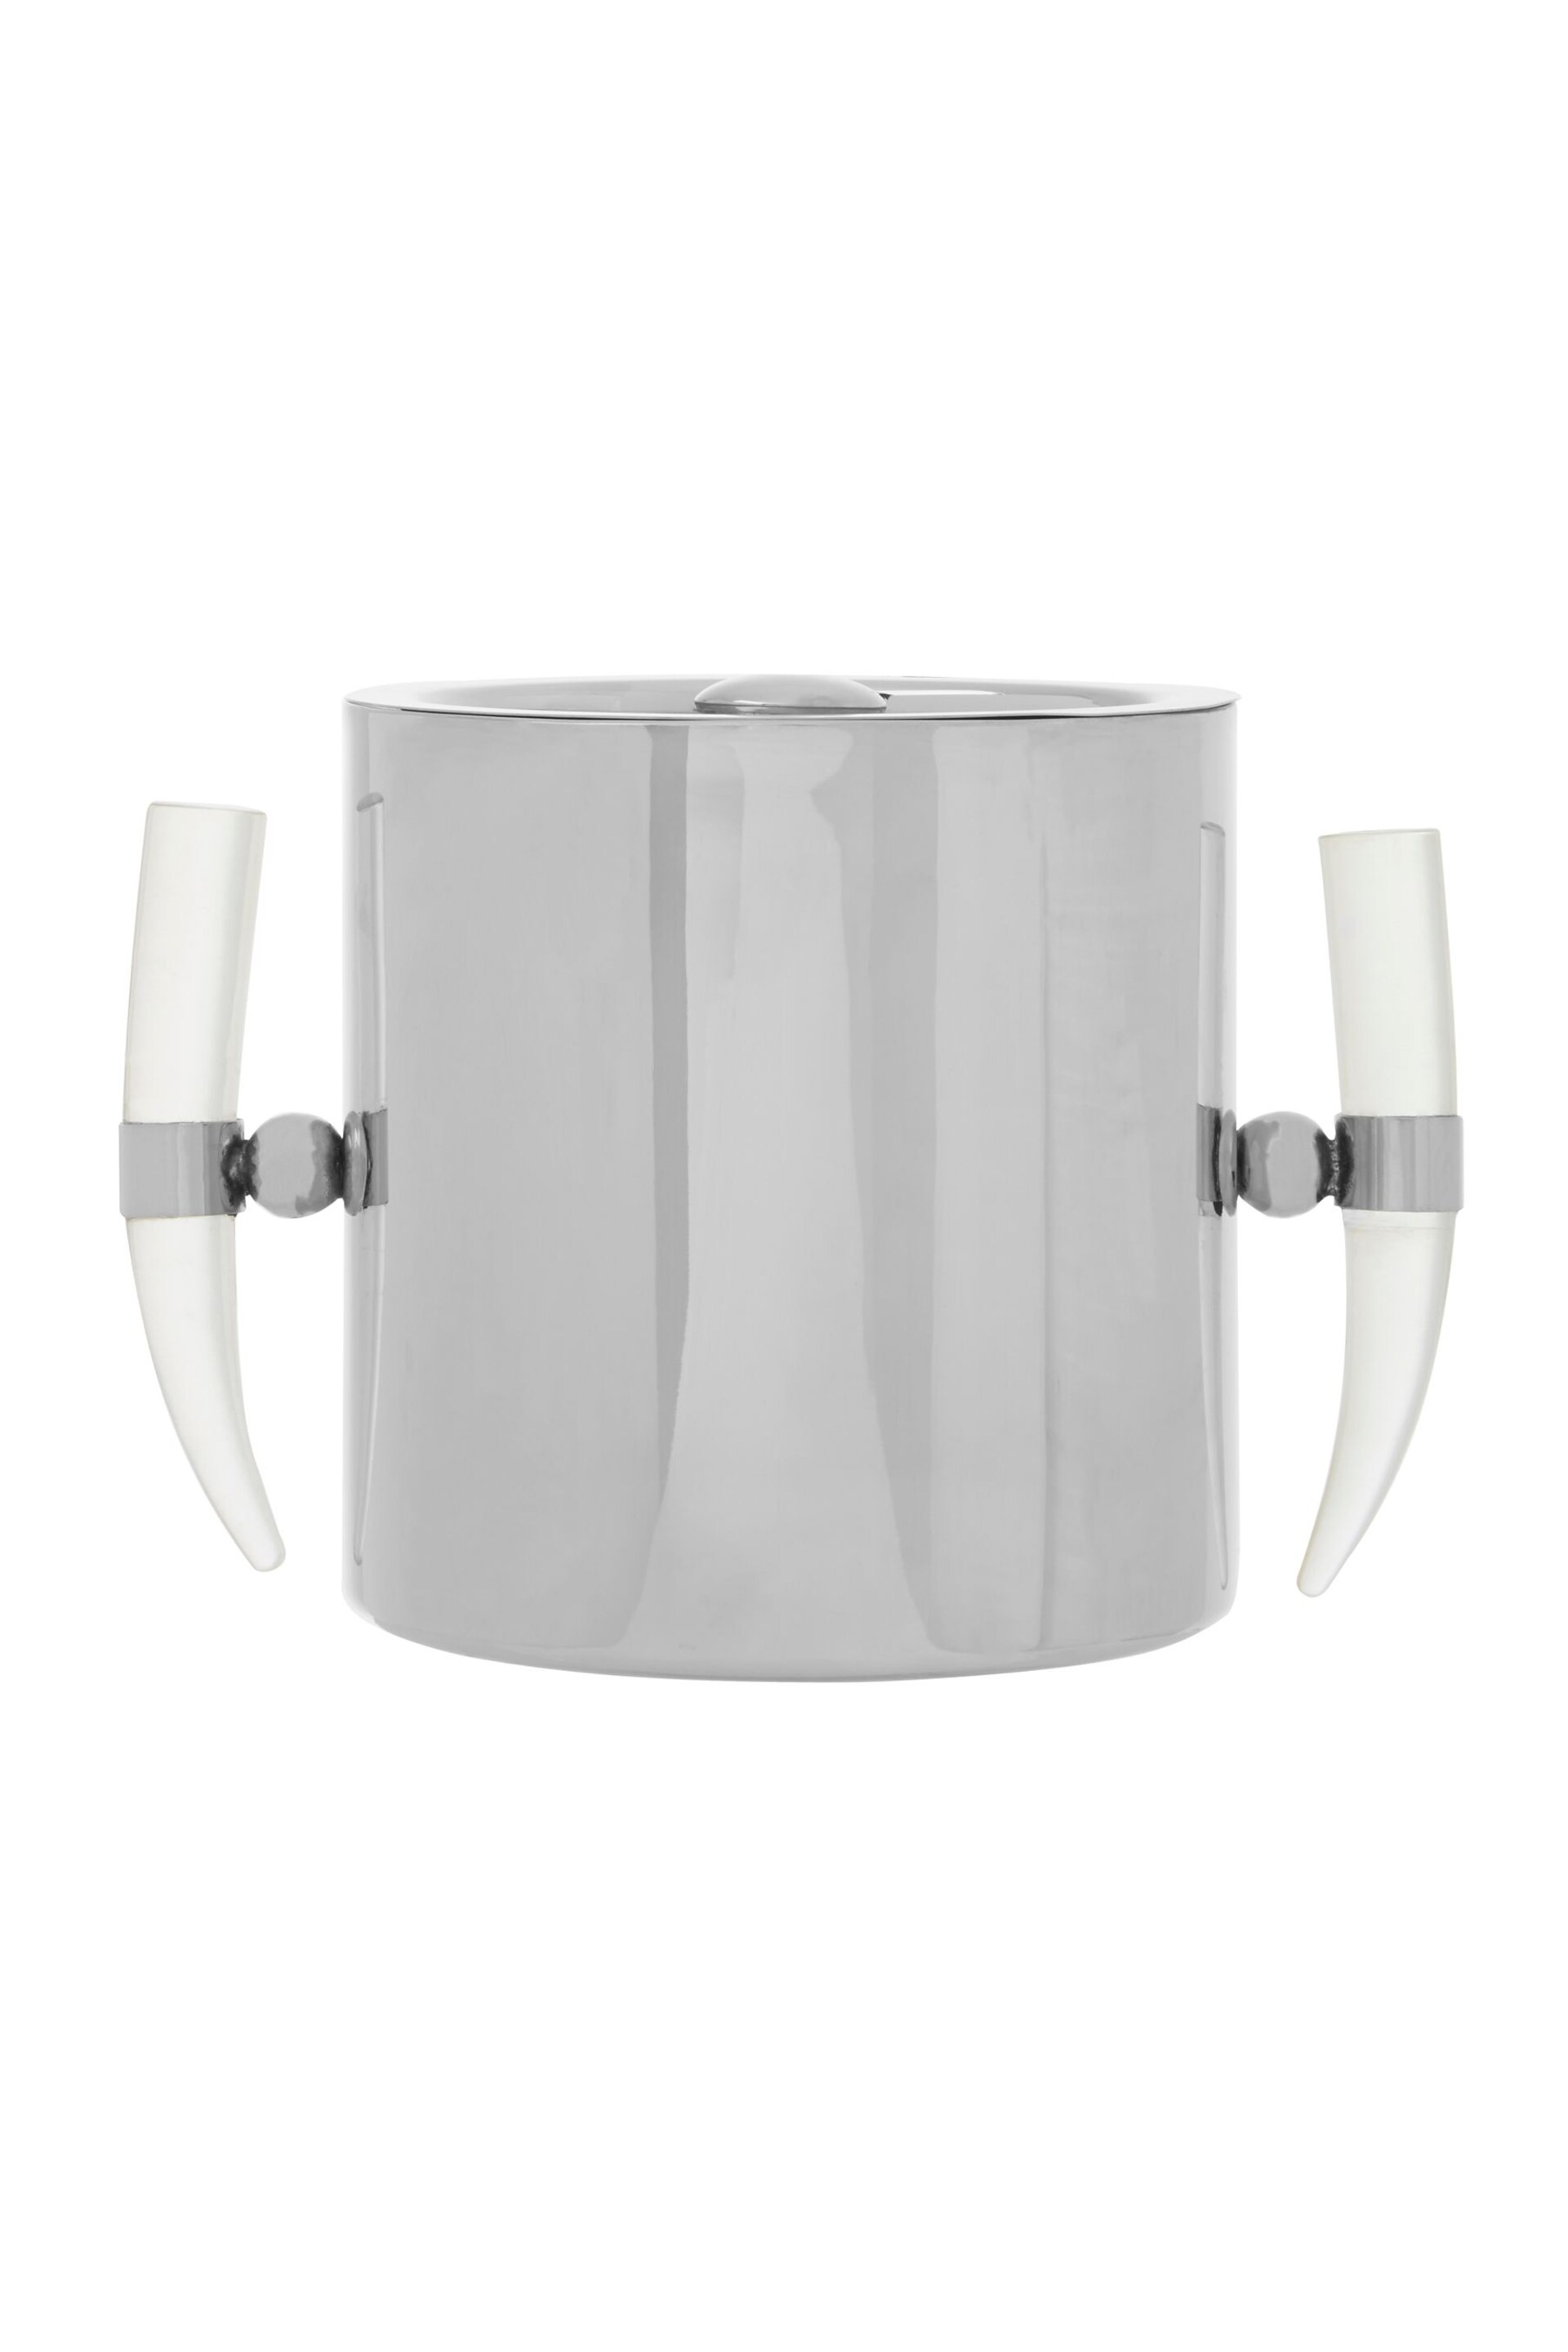 Fifty Five South Silver Herne Ice Bucket - Image 3 of 4